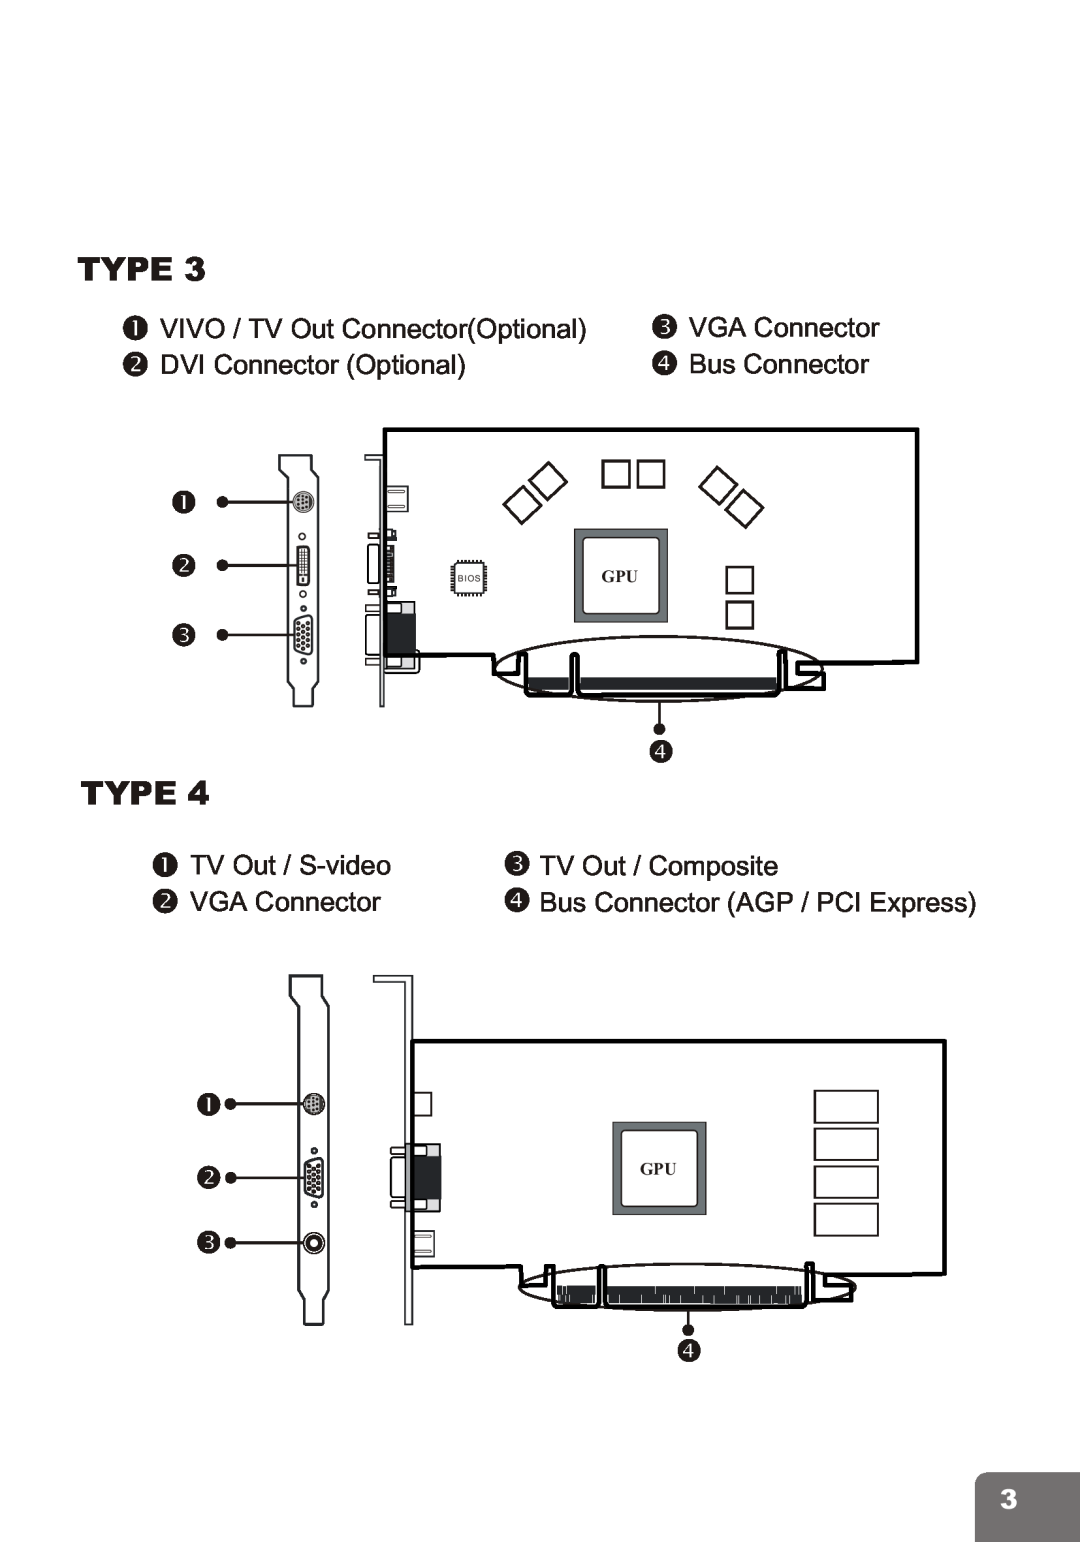 Nvidia PCI Express Series VIVO / TV Out ConnectorOptional, TV Out / S-video, TV Out / Composite, Type, VGA Connector, Bios 